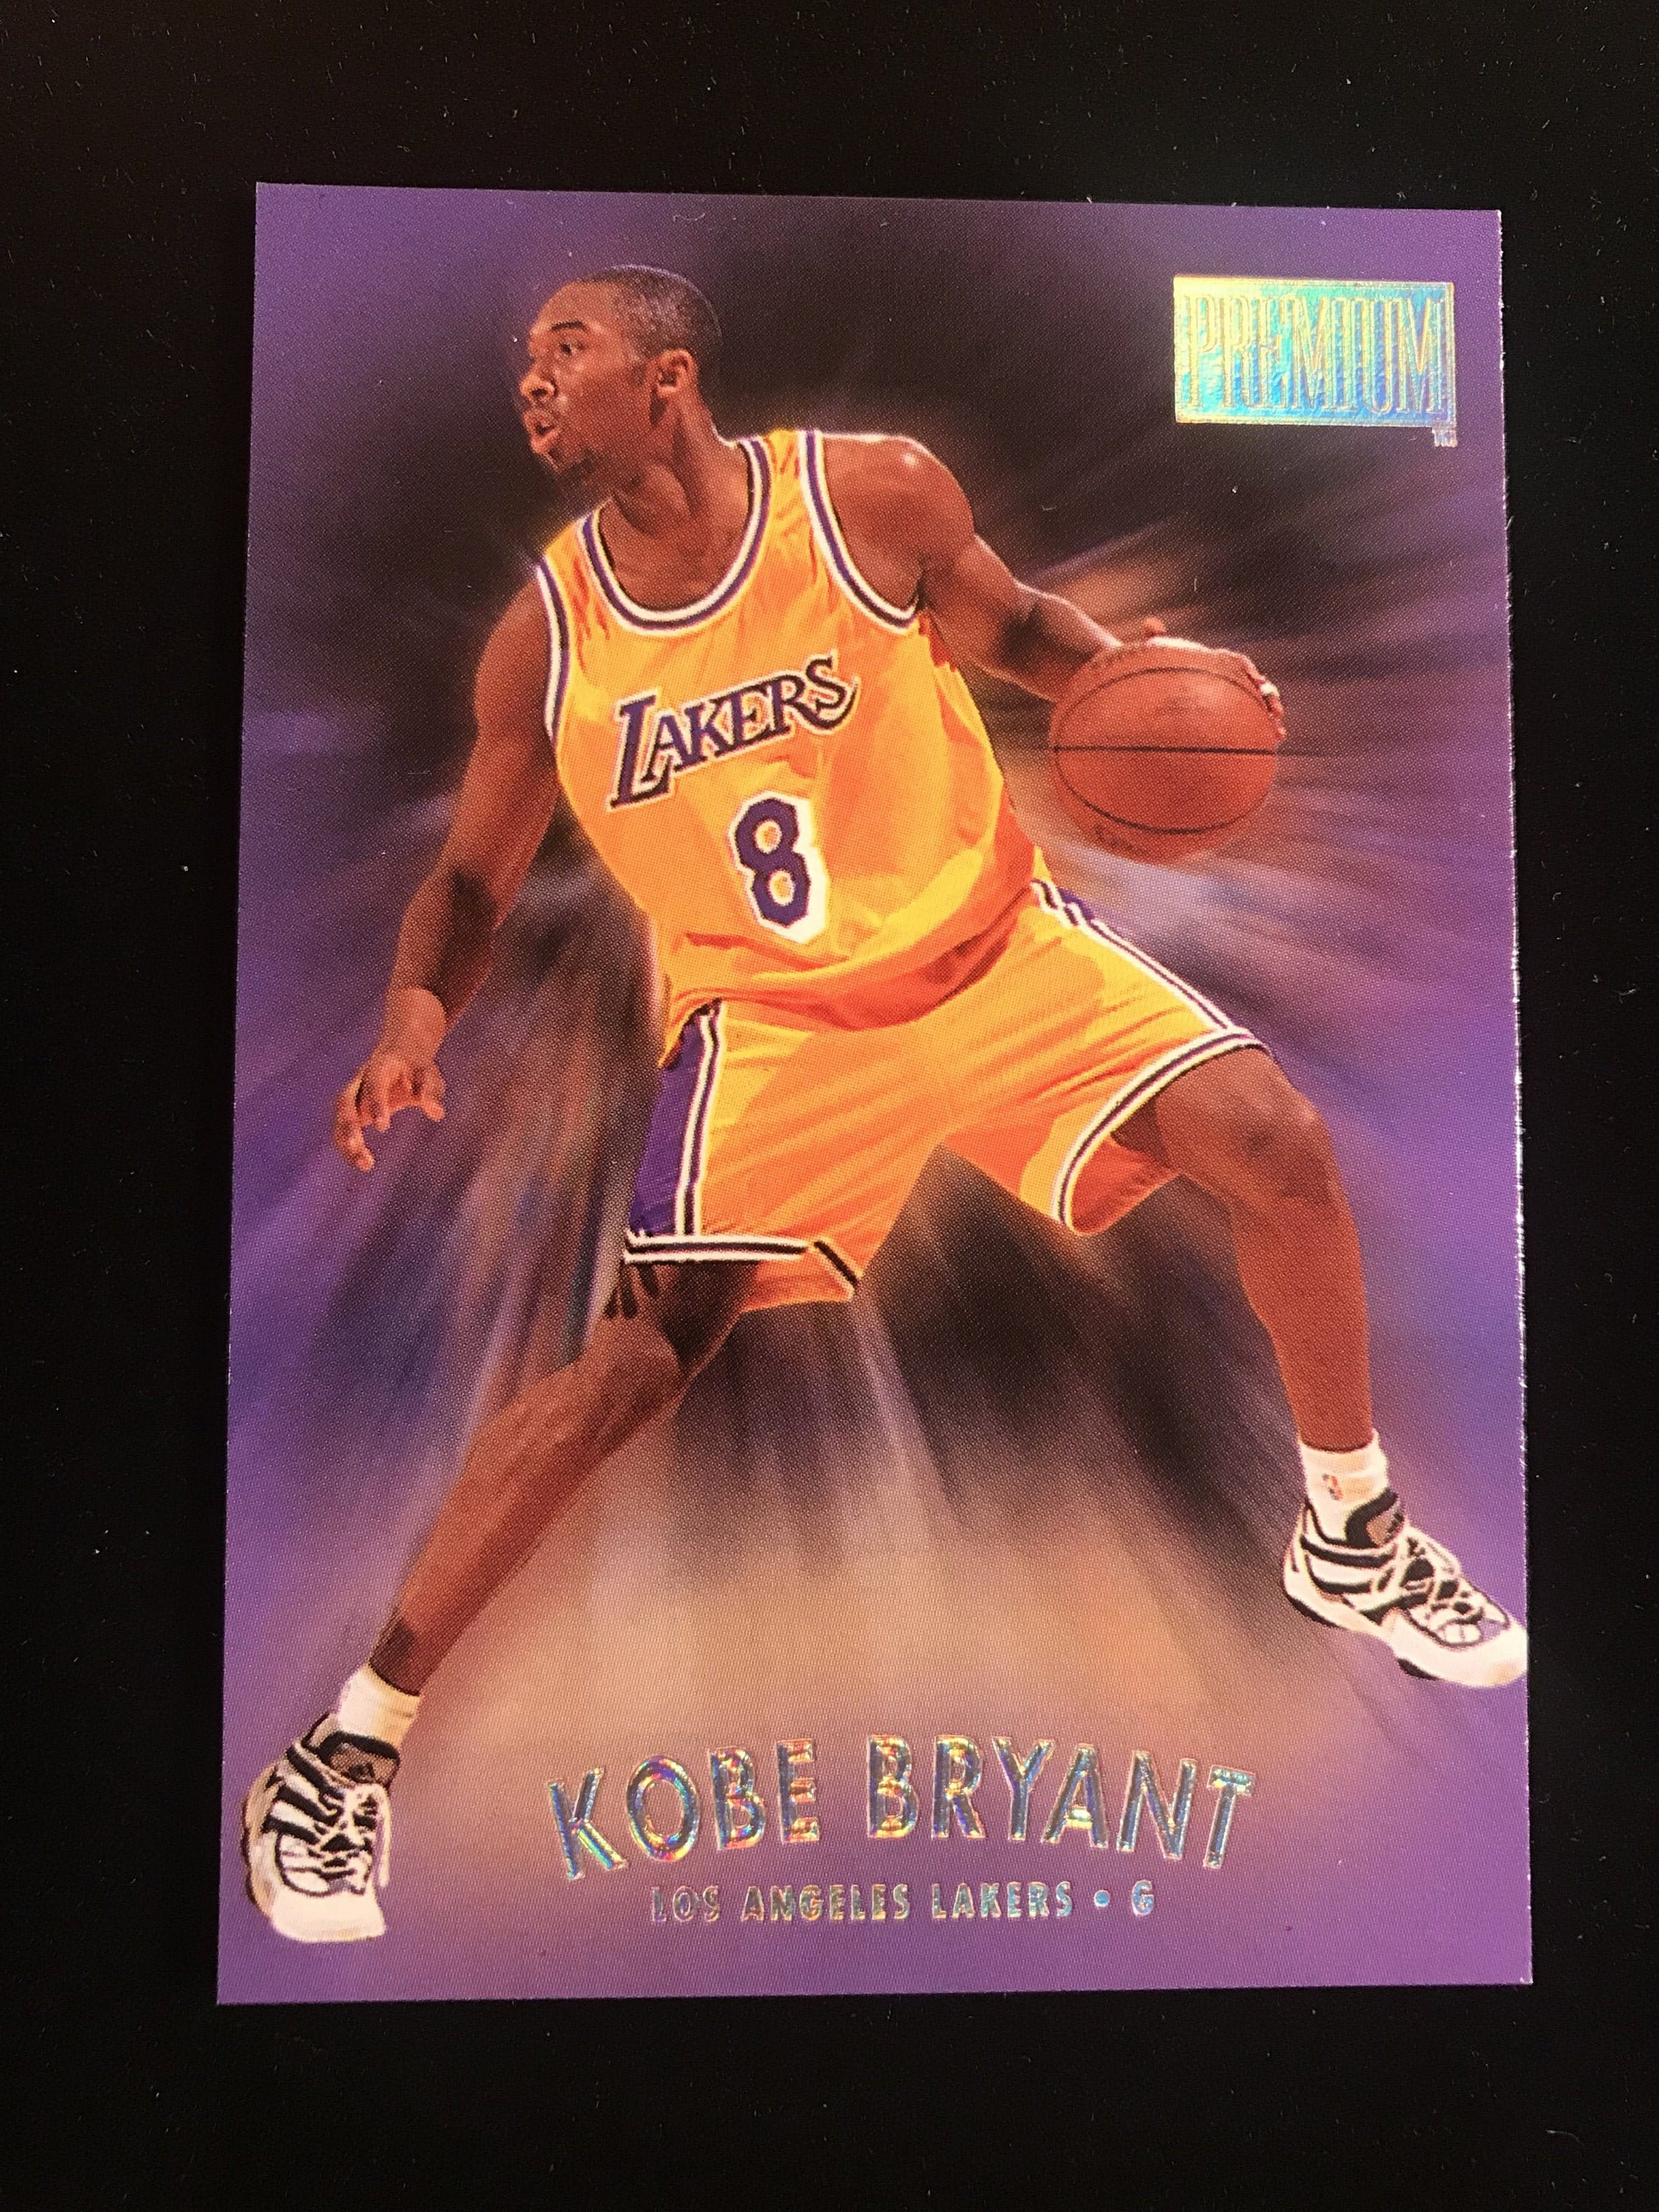 Sold at Auction: 1997-98 SkyBox Premium Kobe Bryant 2nd Year Card #23